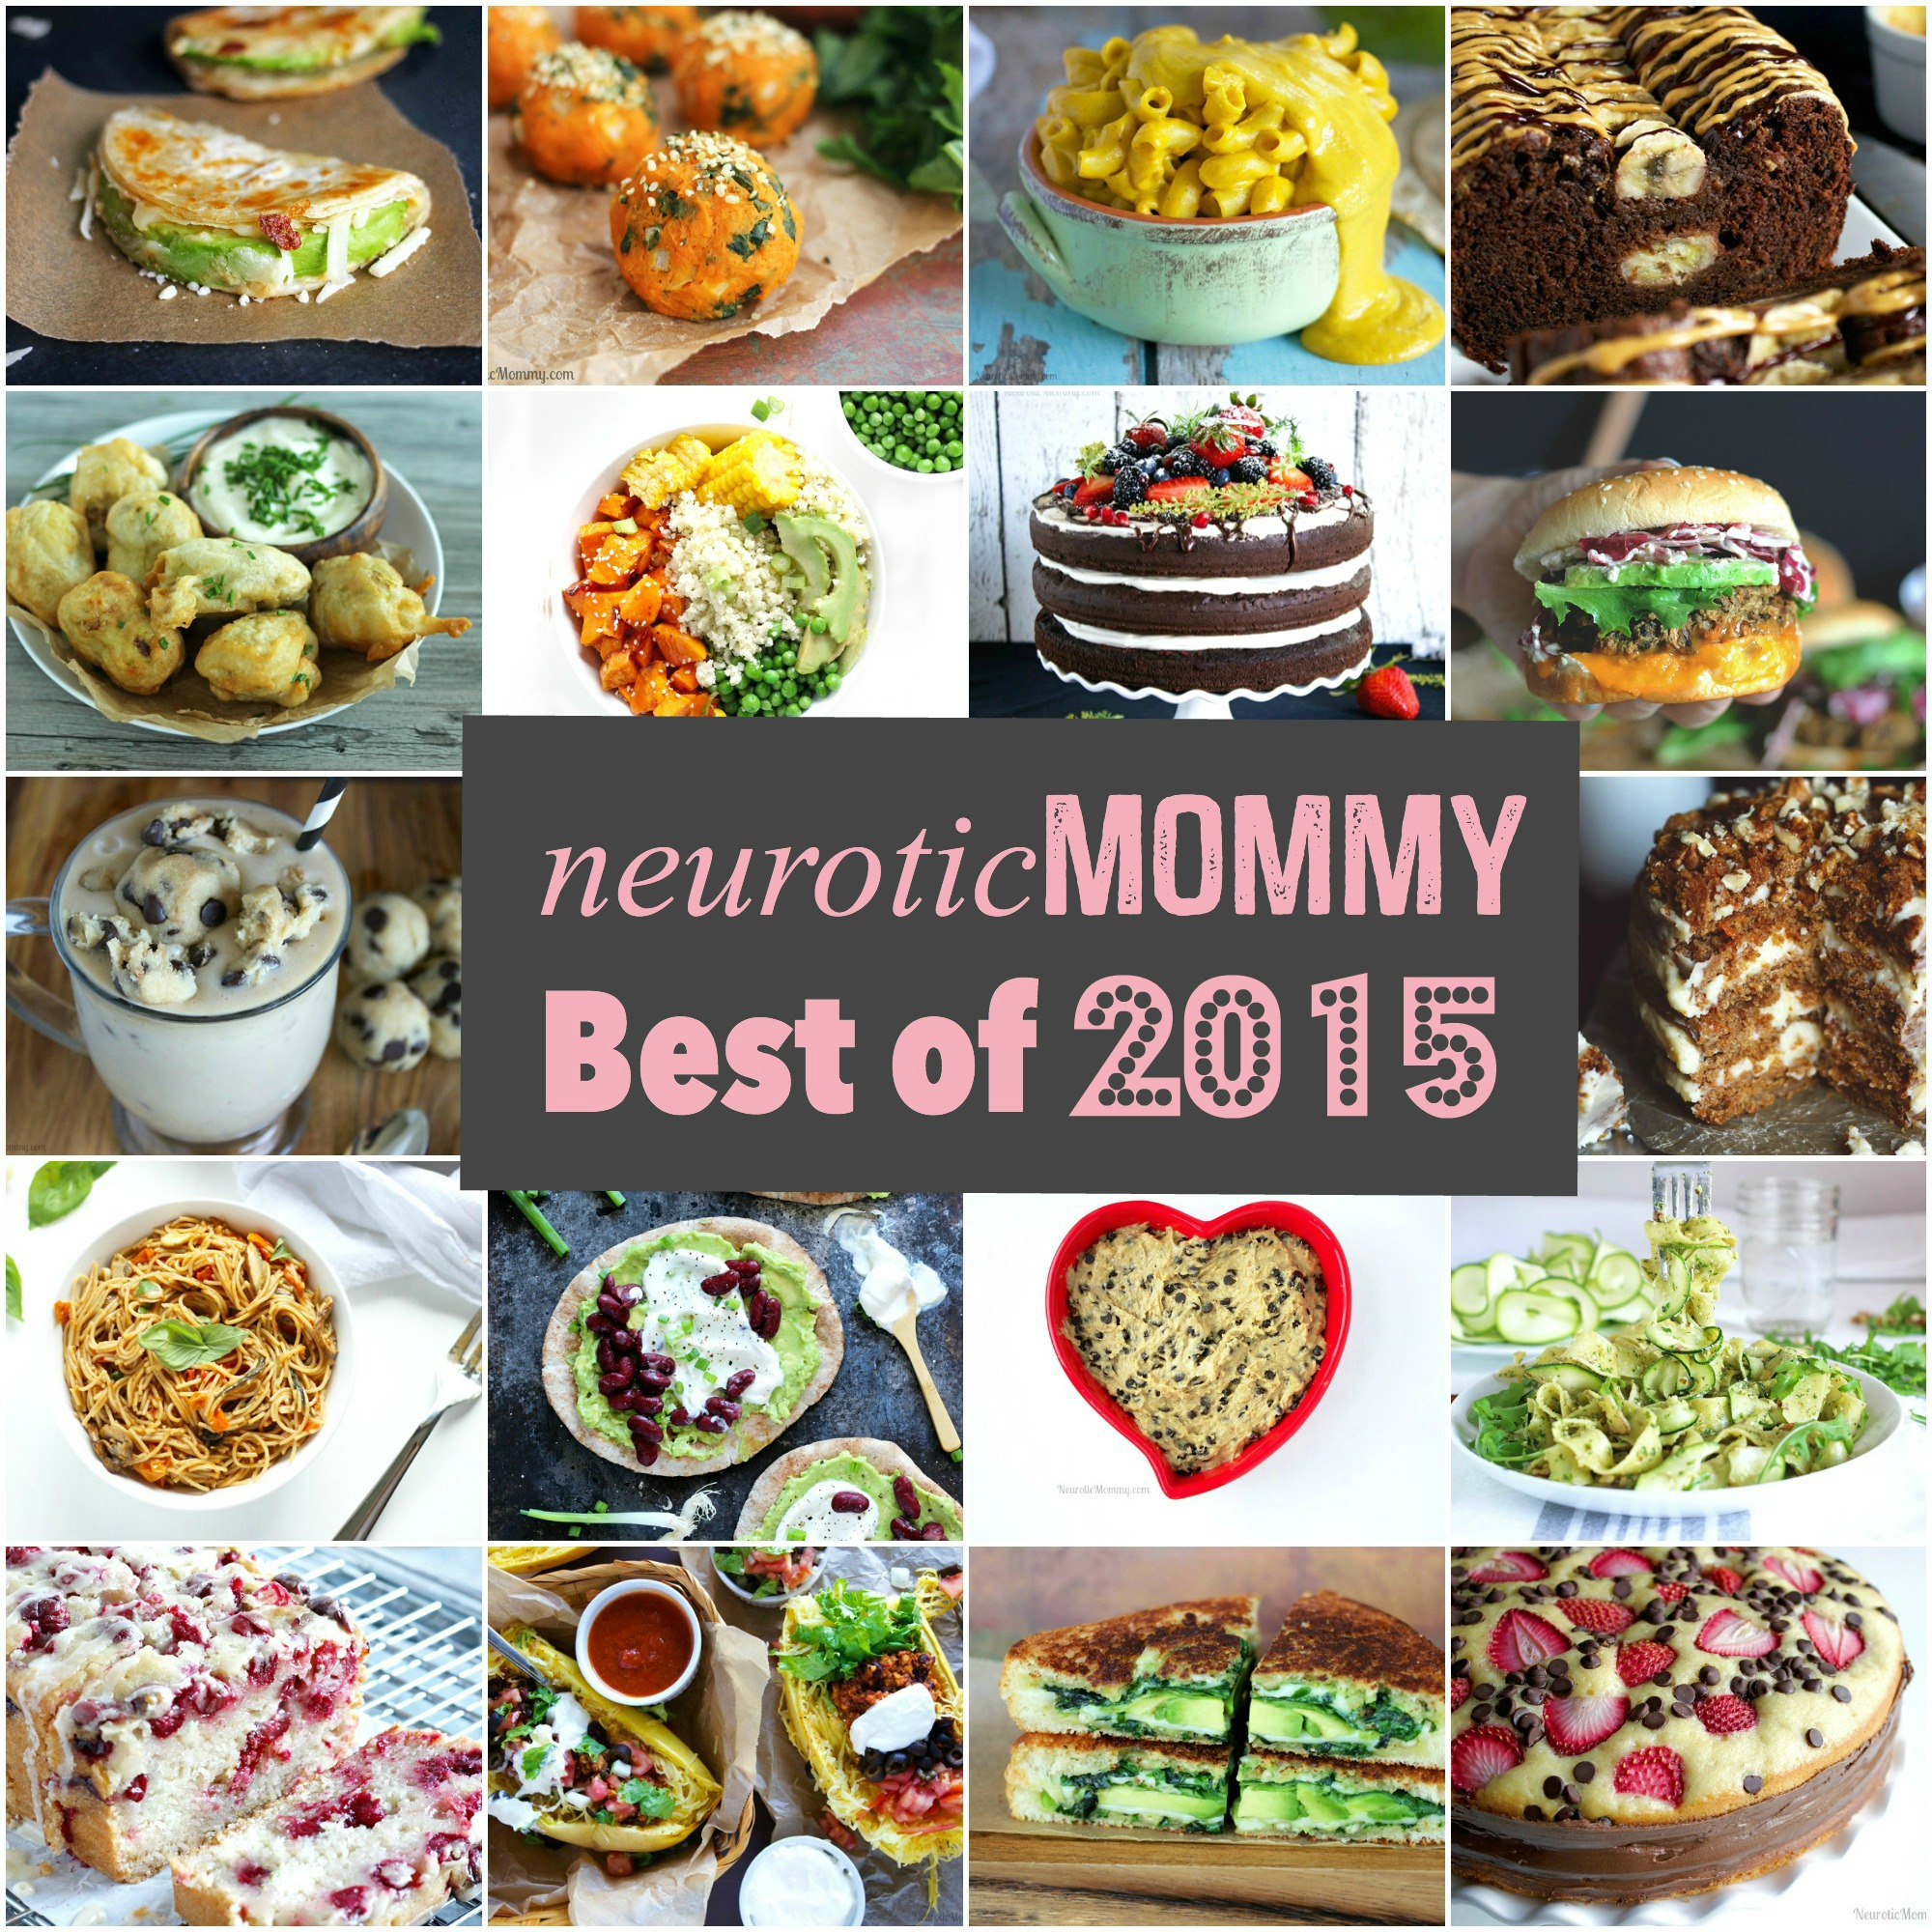 Most Popular Recipes of 2015 and Hello 2016. NeuroticMommy.com #vegan #healthy #newyear #2016